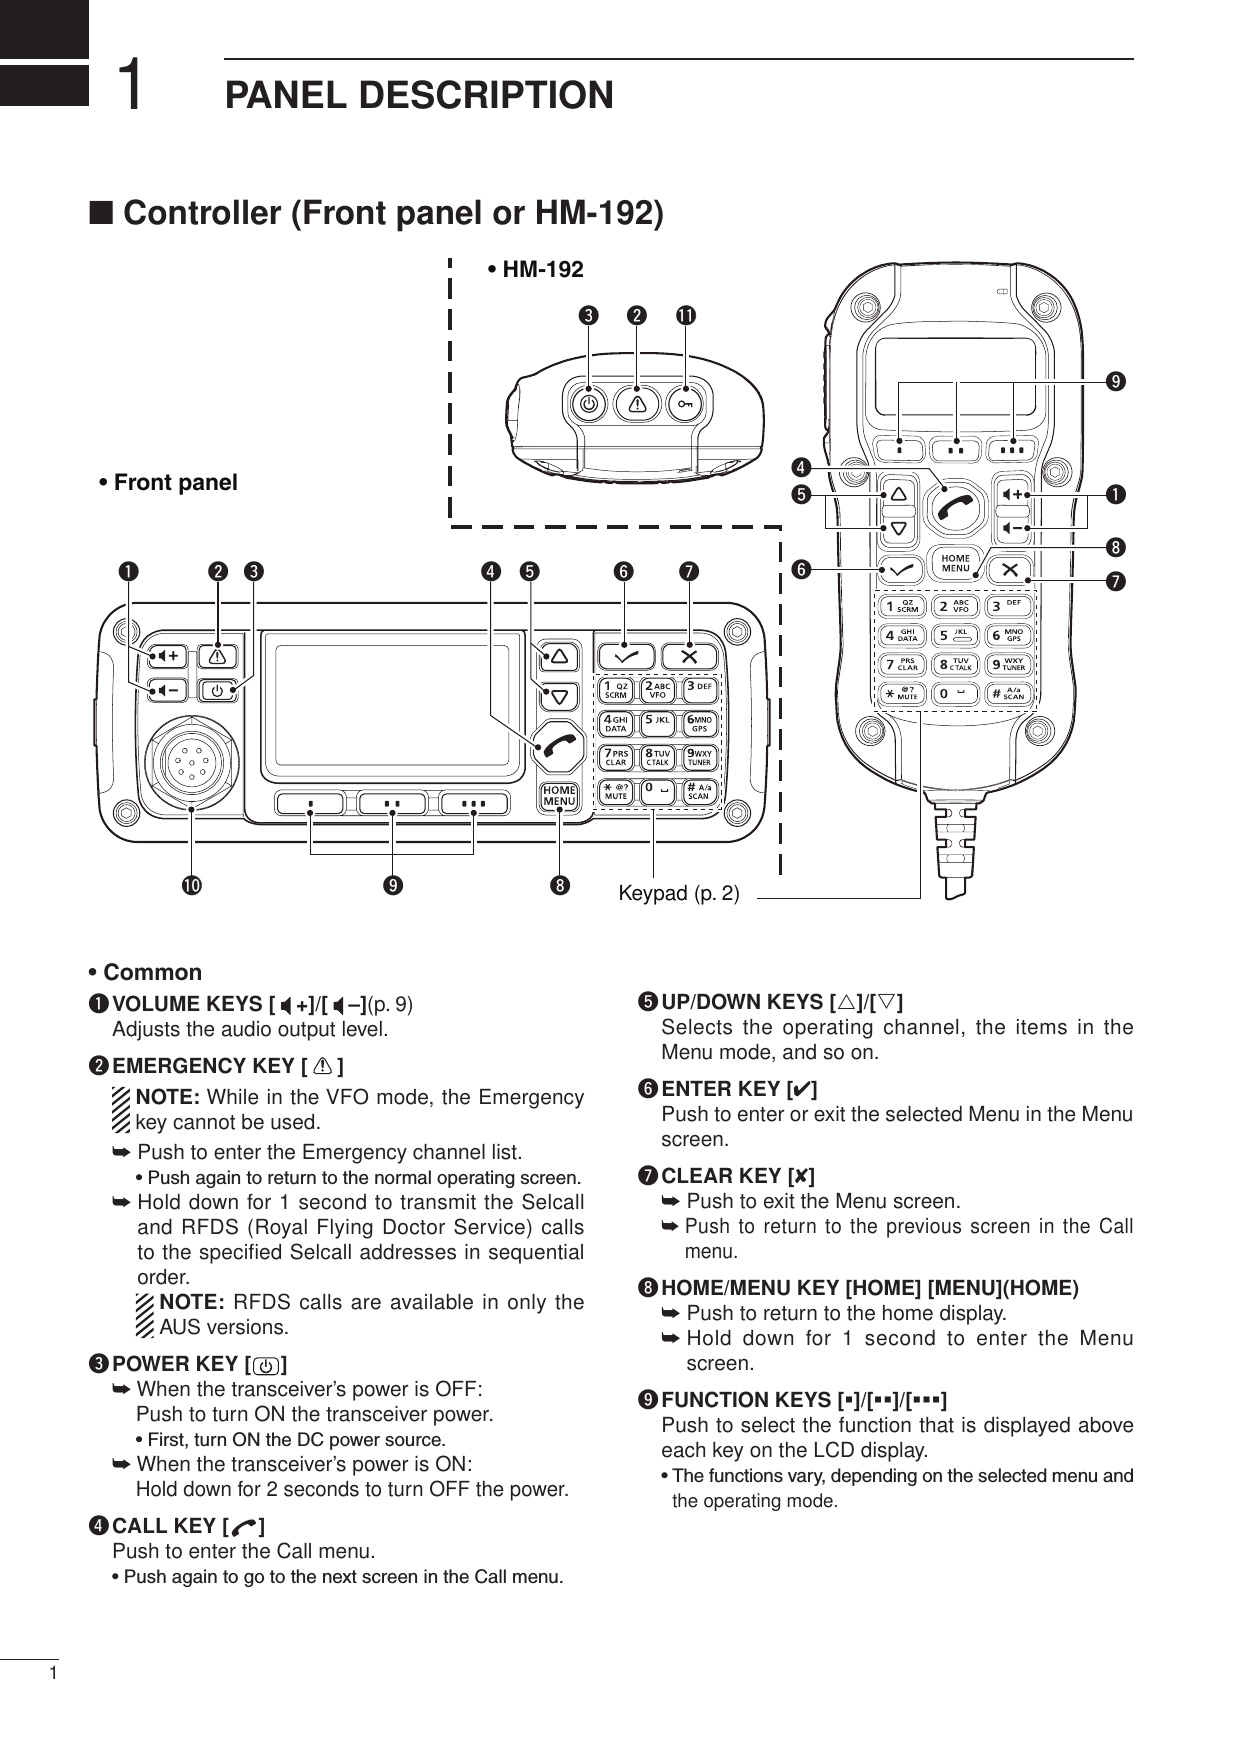 2001 NEW2001 NEW11PANEL DESCRIPTION2001 NEWq VOLUME KEYS [ +]/[ –](p. 9)Adjusts the audio output level.w EMERGENCY KEY [ ]   NOTE: While in the VFO mode, the Emergency key cannot be used.➥  Push to enter the Emergency channel list.    •  Push again to return to the normal operating screen.➥  Hold down for 1 second to transmit the Selcall and RFDS (Royal Flying Doctor Service) calls to the speciﬁed Selcall addresses in sequential order.    NOTE: RFDS calls are available in only the AUS versions.e POWER KEY [ ] ➥  When the transceiver’s power is OFF:    Push to turn ON the transceiver power.    • First, turn ON the DC power source. ➥  When the transceiver’s power is ON:  Hold down for 2 seconds to turn OFF the power.r CALL KEY [ ]Push to enter the Call menu.  •  Push again to go to the next screen in the Call menu.t UP/DOWN KEYS [r]/[s]Selects the  operating channel, the items in the Menu mode, and so on.y ENTER KEY [4] Push to enter or exit the selected Menu in the Menu screen.u CLEAR KEY [8]➥  Push to exit the Menu screen.➥  Push to return to the previous screen in the Call menu. i HOME/MENU KEY [HOME] [MENU](HOME)➥  Push to return to the home display. ➥  Hold  down  for  1  second  to  enter  the  Menu screen.o FUNCTION KEYS [§]/[§§]/[§§§]   Push to select the function that is displayed above each key on the LCD display.   •  The functions vary, depending on the selected menu and the operating mode.q ww !1eerio!0tyuKeypad (p. 2)qouytri• HM-192• Front panel■ Controller (Front panel or HM-192)• Common